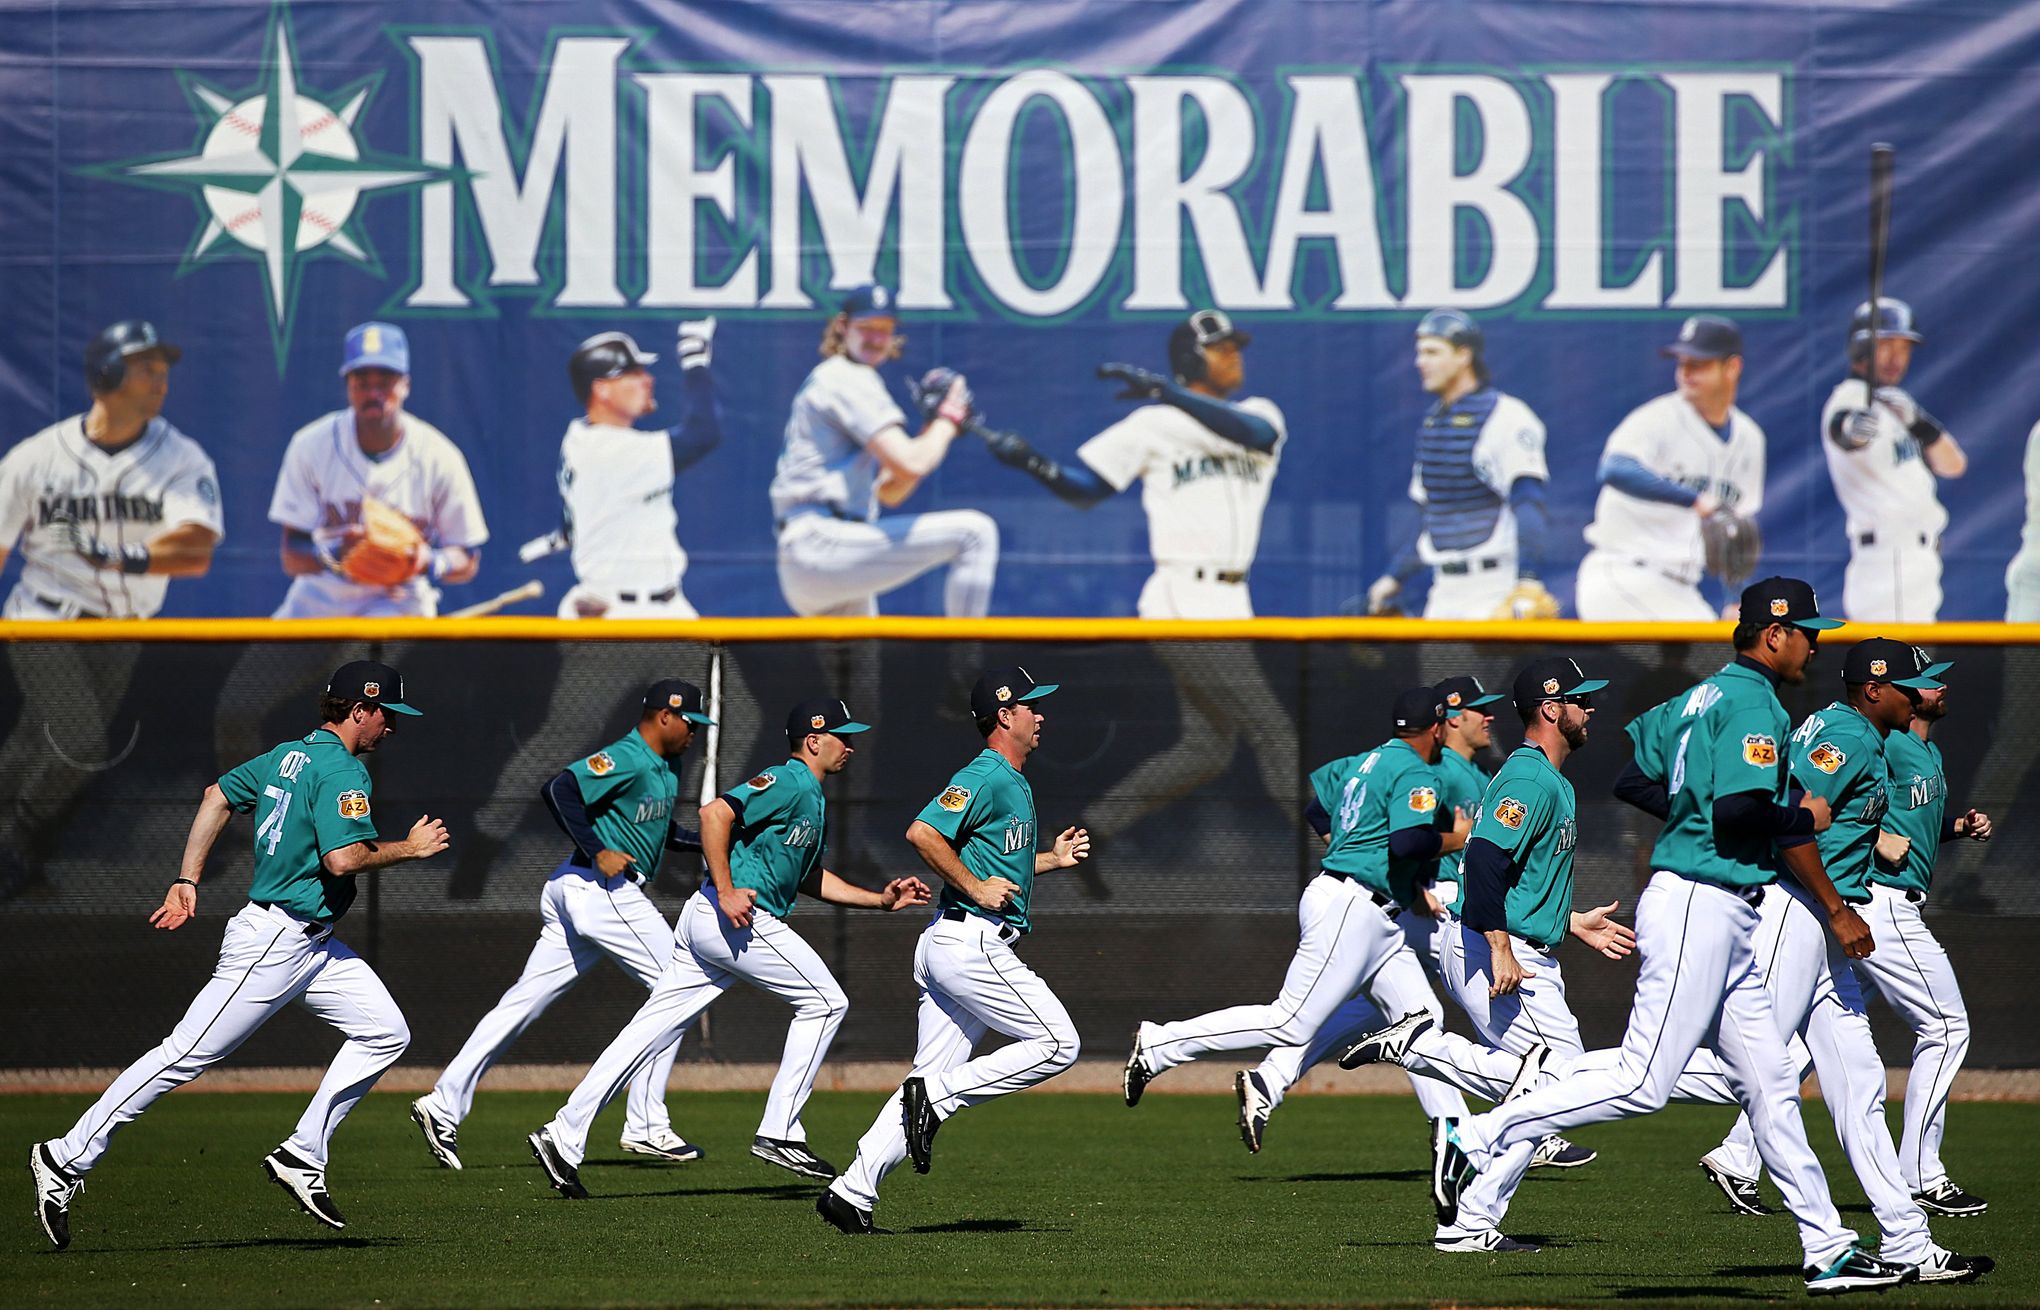 Seattle Mariners - Spring Training tickets go on sale Monday